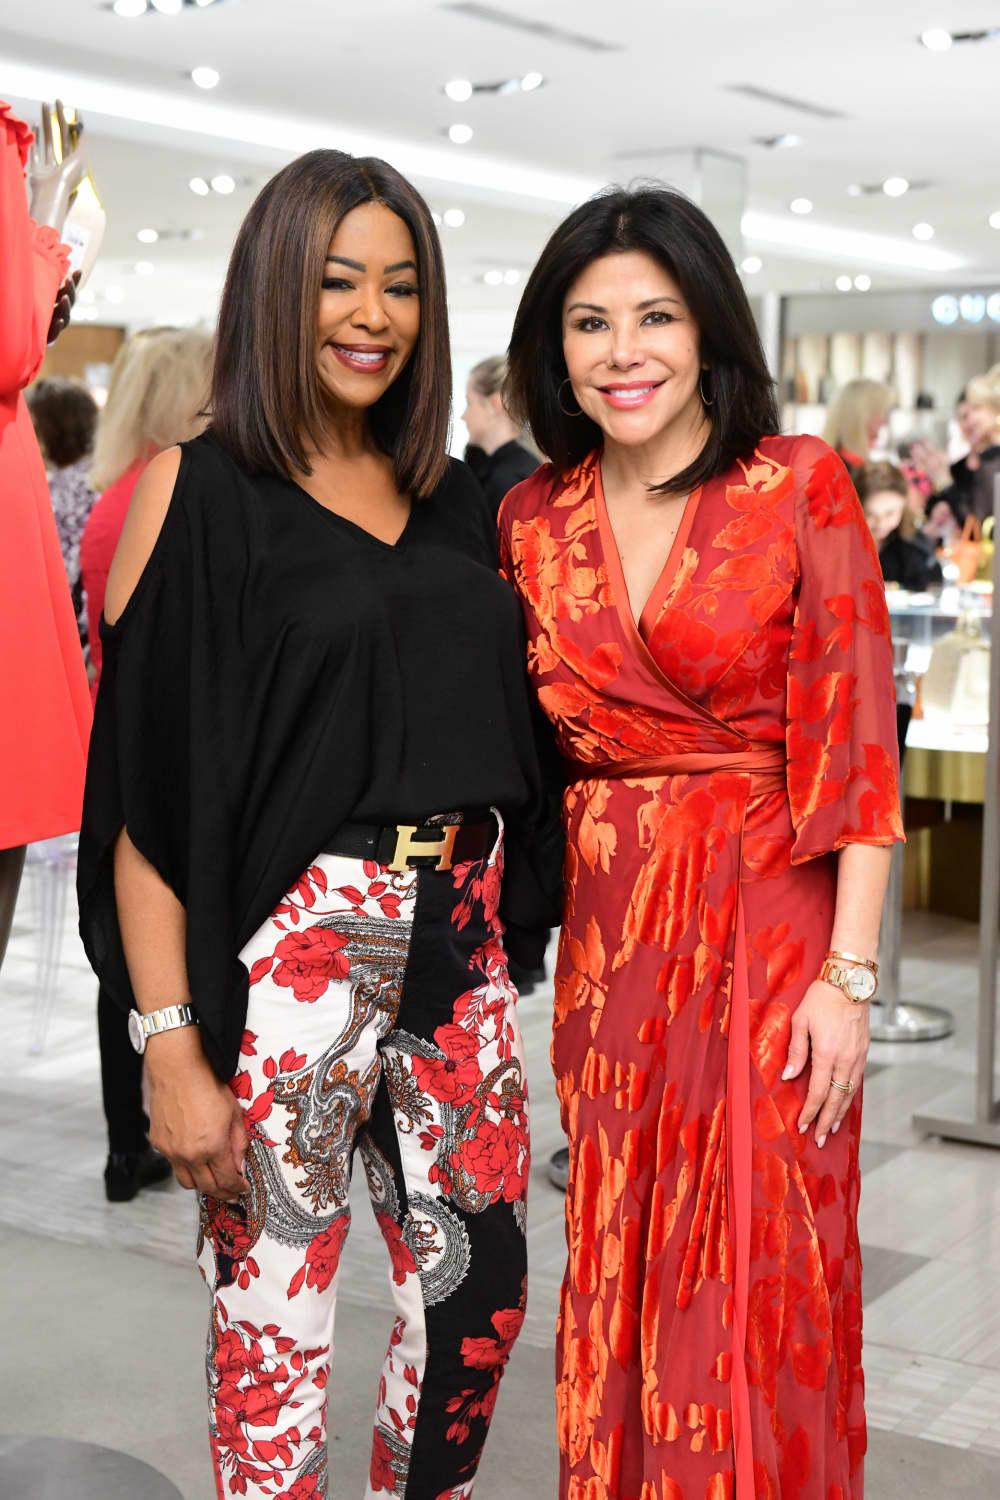 An Afternoon to Love at Saks Fifth Avenue with Houston Sweethearts